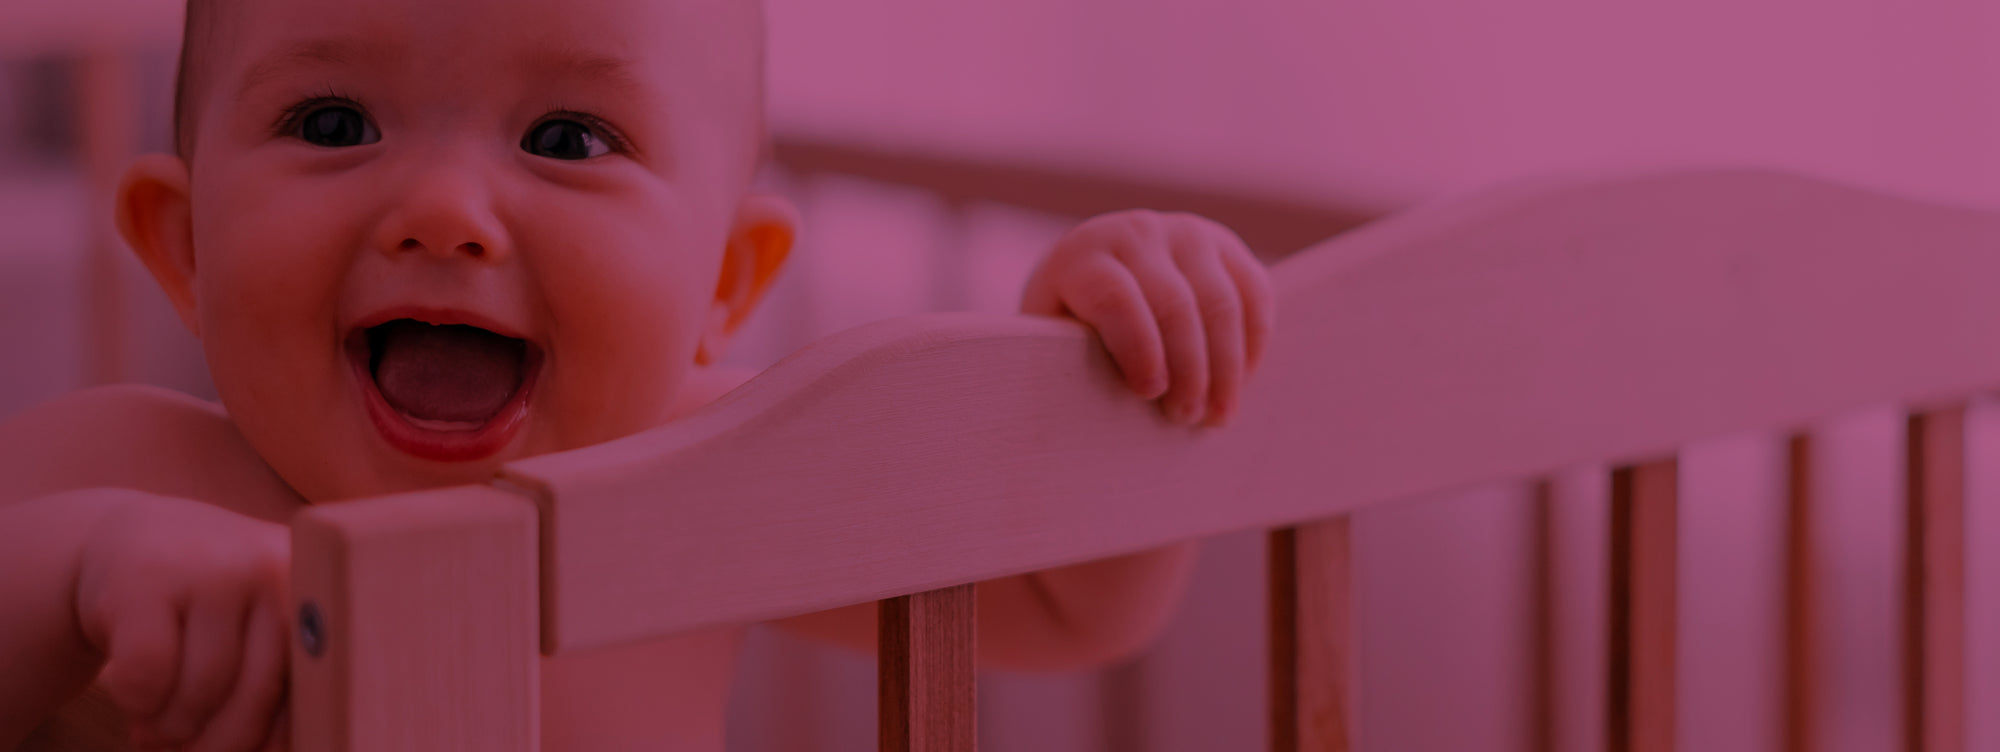 baby smiling in crib